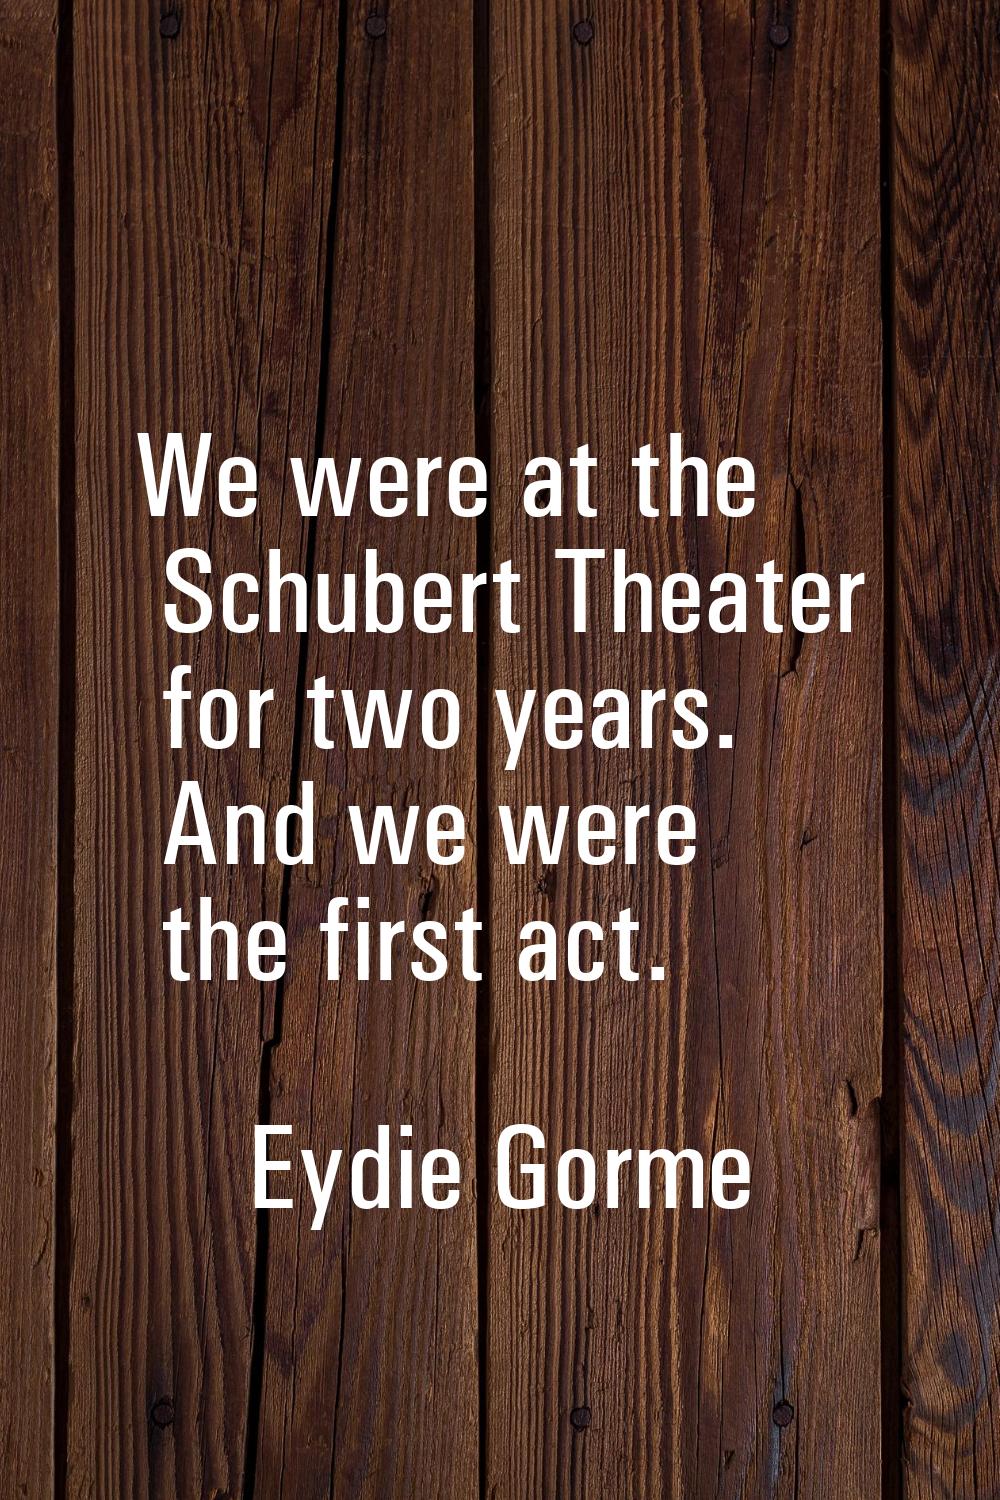 We were at the Schubert Theater for two years. And we were the first act.